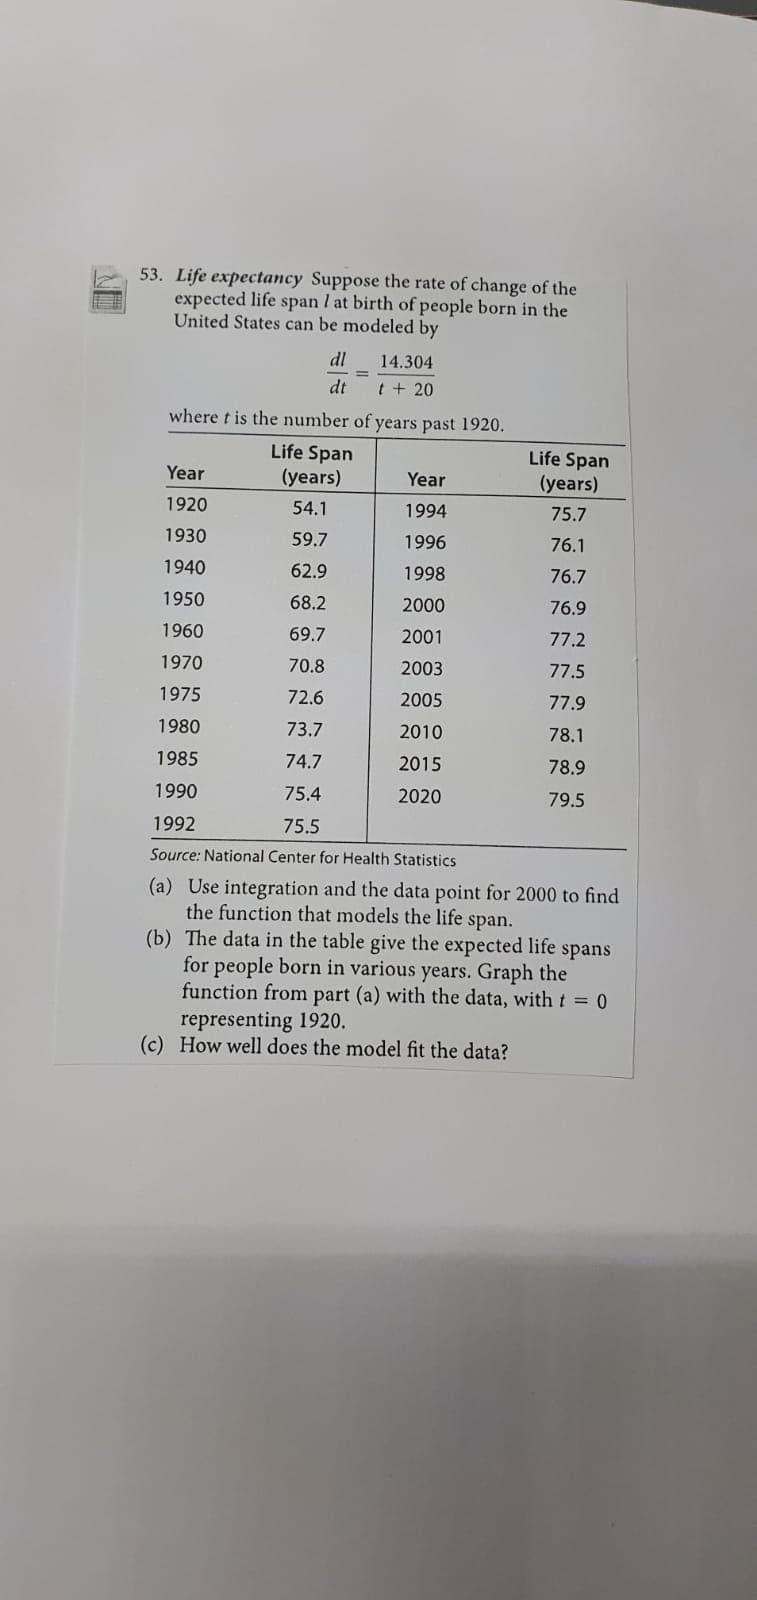 53. Life expectancy Suppose the rate of change of the
expected life span l at birth of people born in the
United States can be modeled by
dl
14.304
dt
t + 20
where t is the number of years past 1920.
Life Span
(years)
Life Span
Year
Year
(years)
1920
54.1
1994
75.7
1930
59.7
1996
76.1
1940
62.9
1998
76.7
1950
68.2
2000
76.9
1960
69.7
2001
77.2
1970
70.8
2003
77.5
1975
72.6
2005
77.9
1980
73.7
2010
78.1
1985
74.7
2015
78.9
1990
75.4
2020
79.5
1992
75.5
Source: National Center for Health Statistics
(a) Use integration and the data point for 2000 to find
the function that models the life
(b) The data in the table give the expected life spans
for people born in various years. Graph the
function from part (a) with the data, with t = 0
span.
representing 1920.
(c) How well does the model fit the data?
